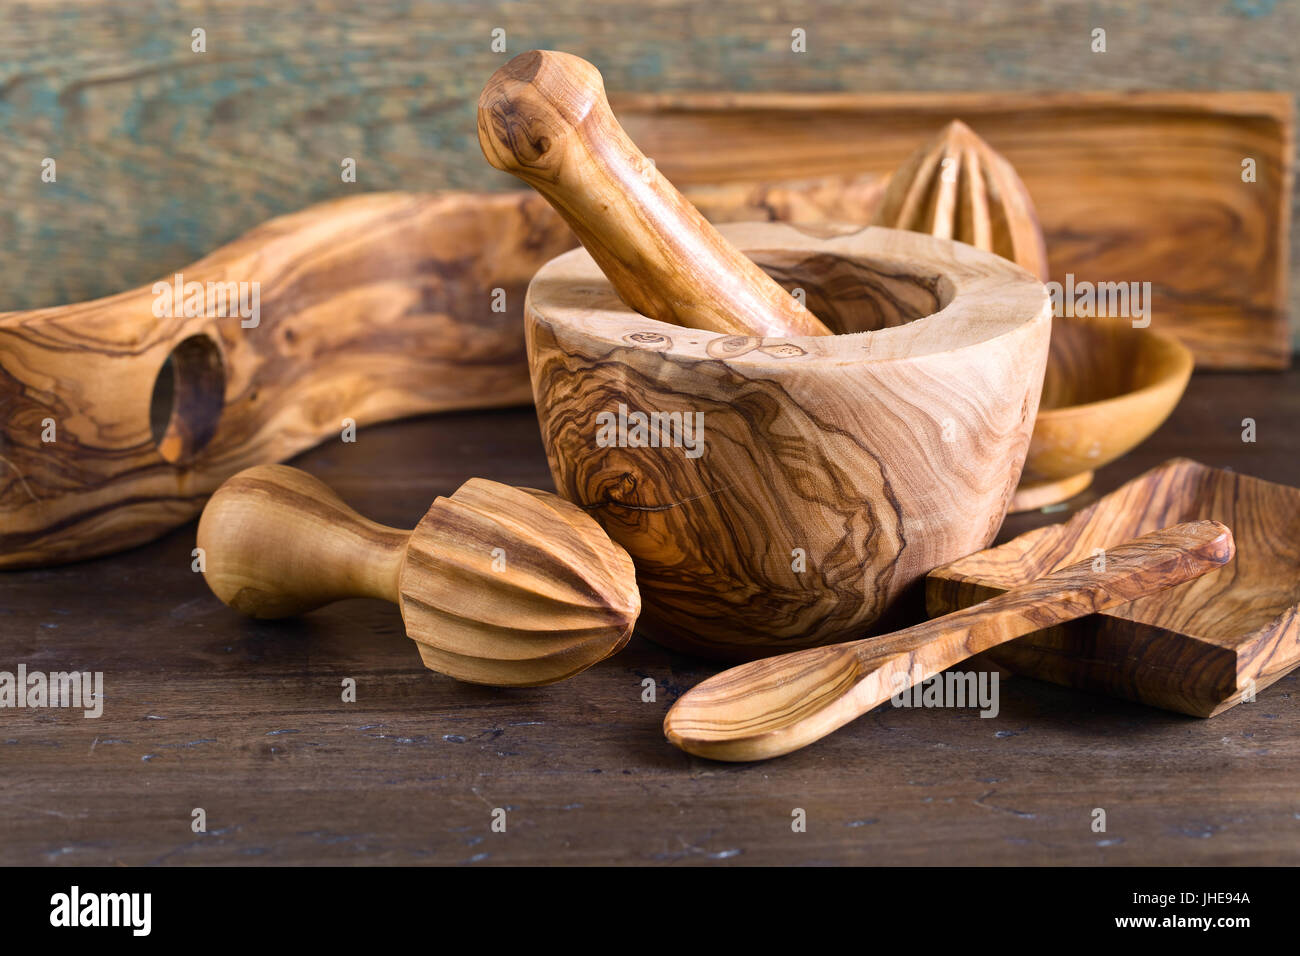 Set of wooden kitchen utensils made from olive wood Stock Photo